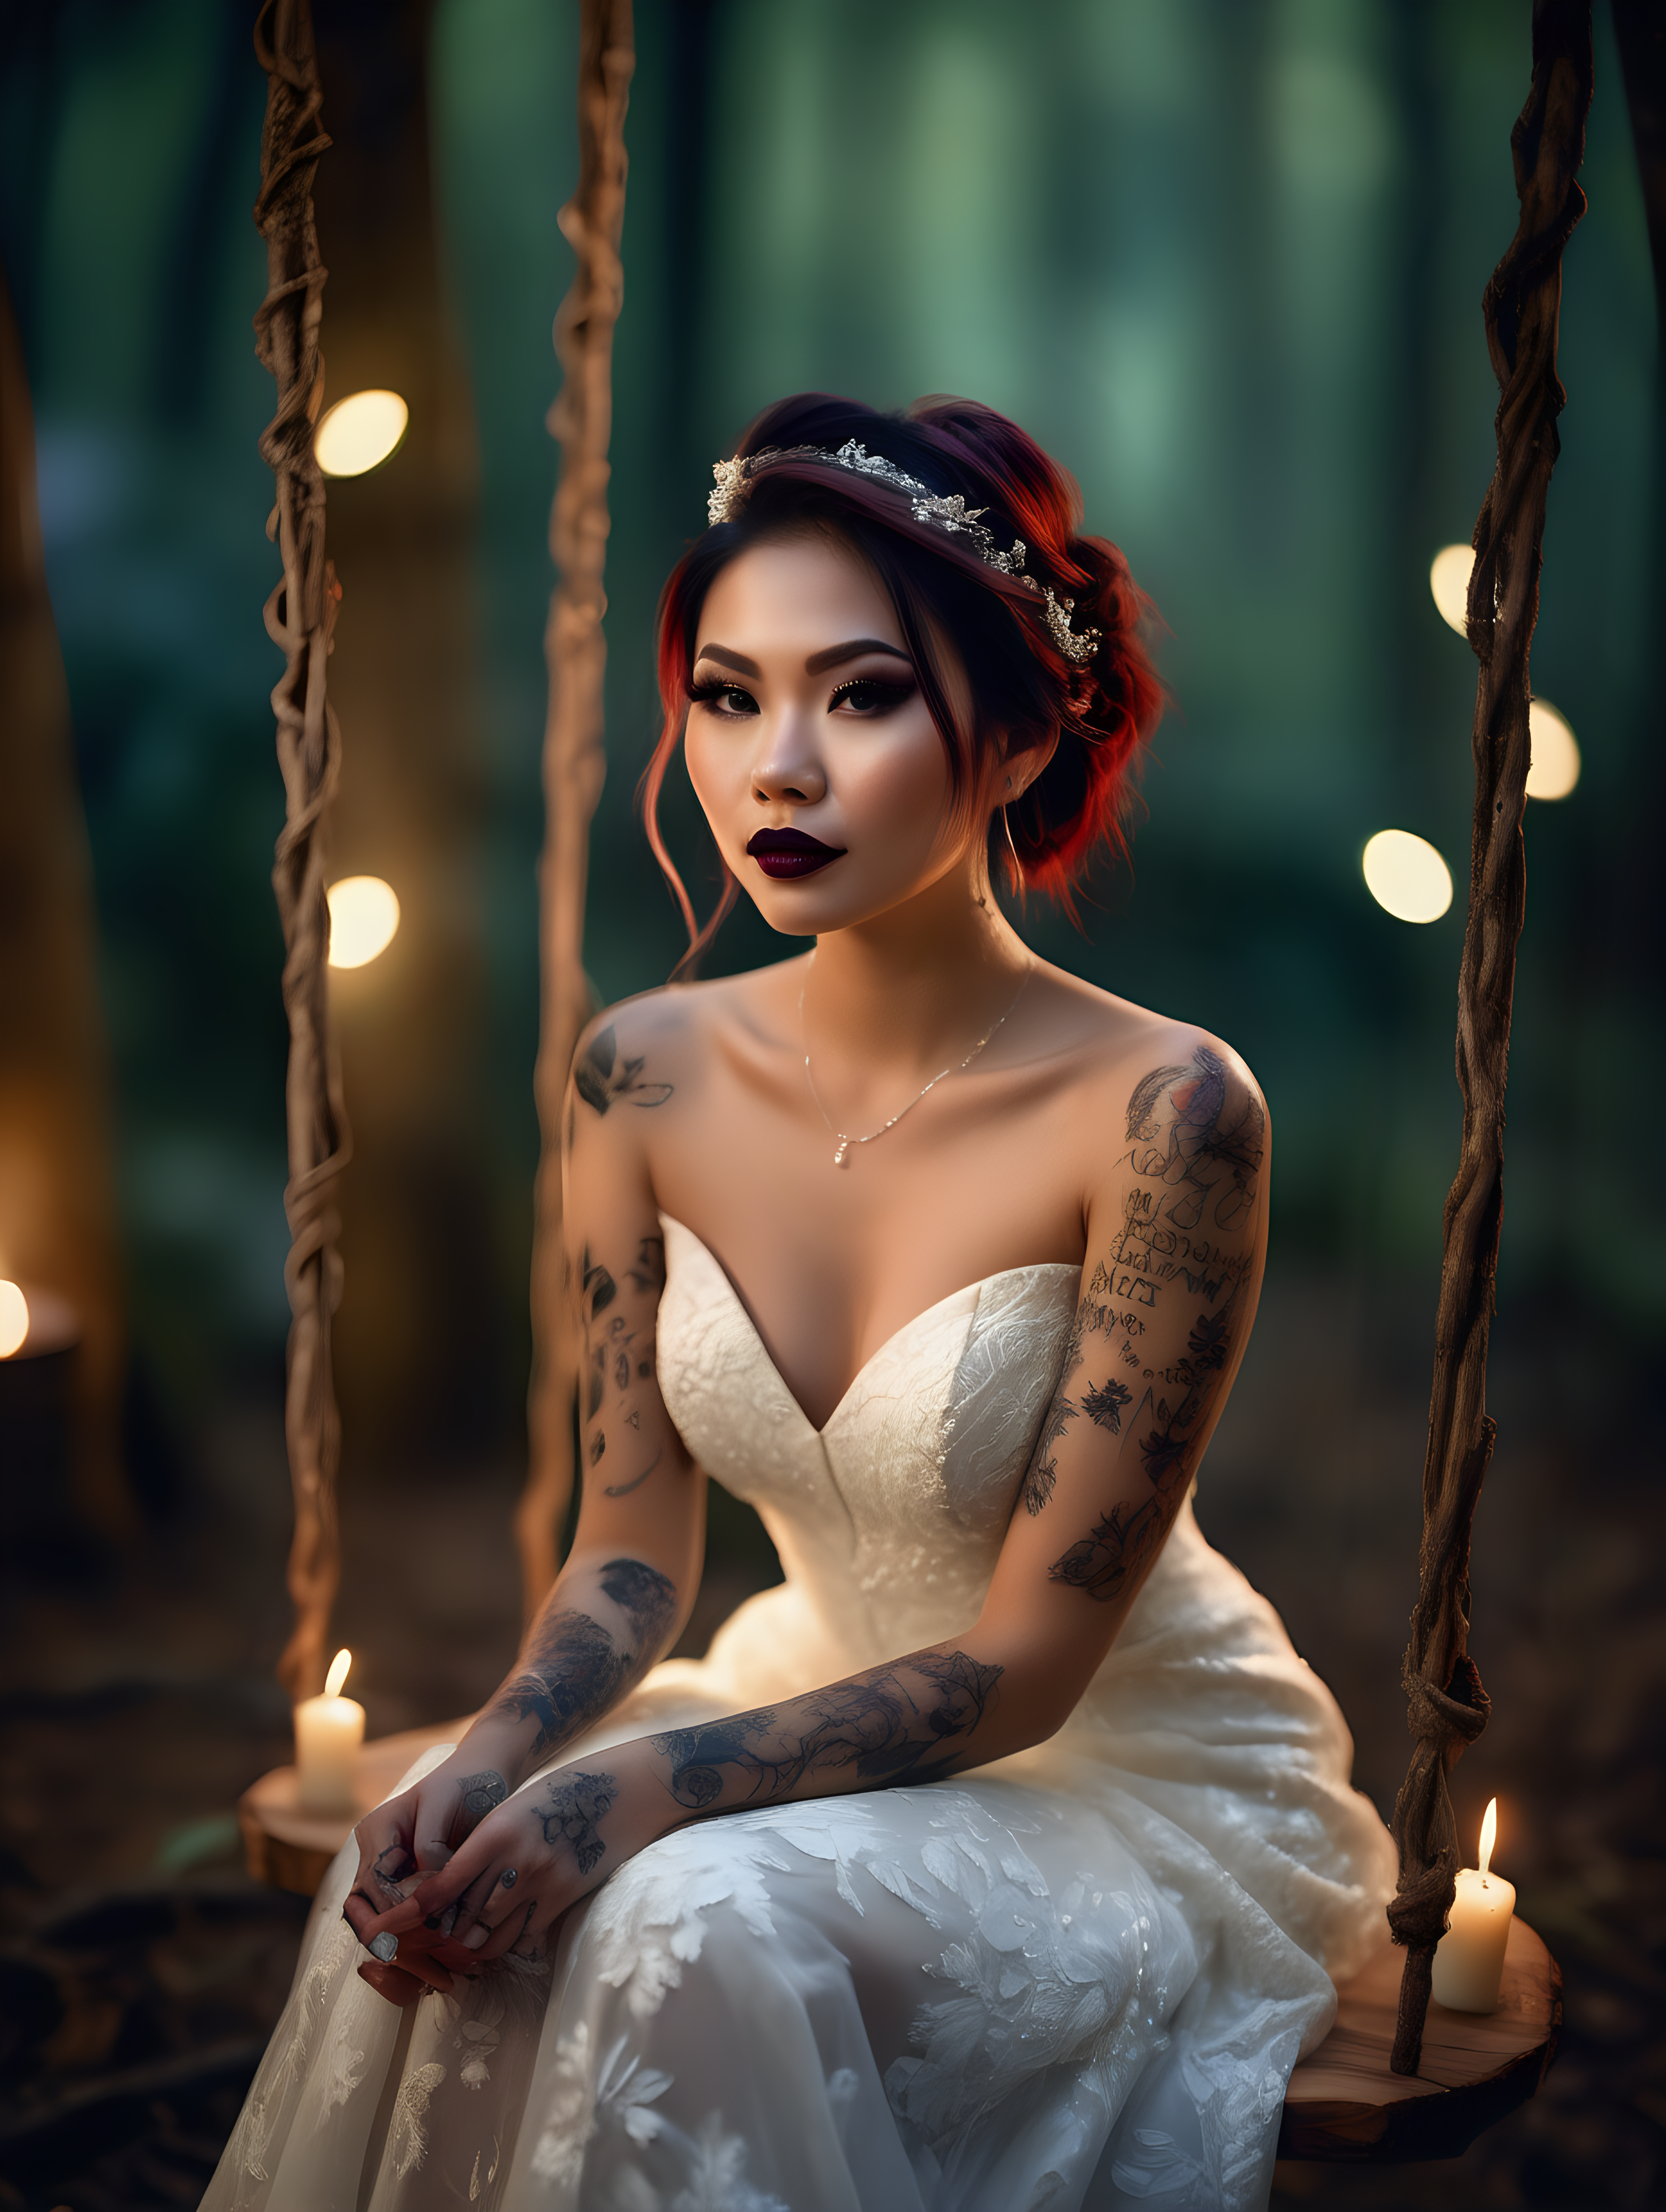 Beautiful Vietnamese
woman, body tattoos, dark
eye shadow, dark lipstick, hair in a messy updo, wearing a gorgeous wedding dress, sitting in hand carved tree swing, bokeh background, soft light on face, standing in front of elaborate candlelit forest wedding, photorealistic, very high detail 